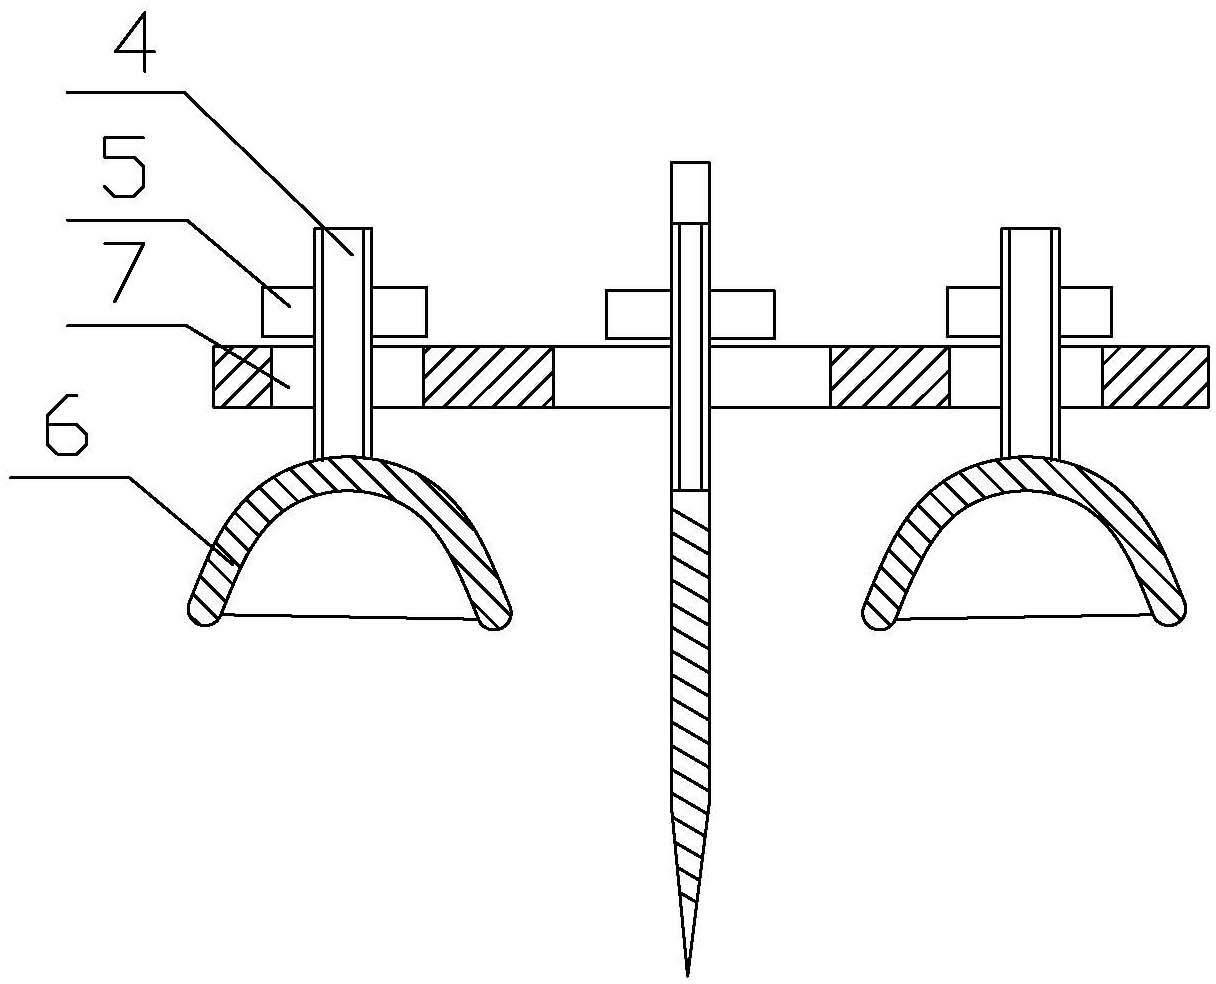 Fang removing device